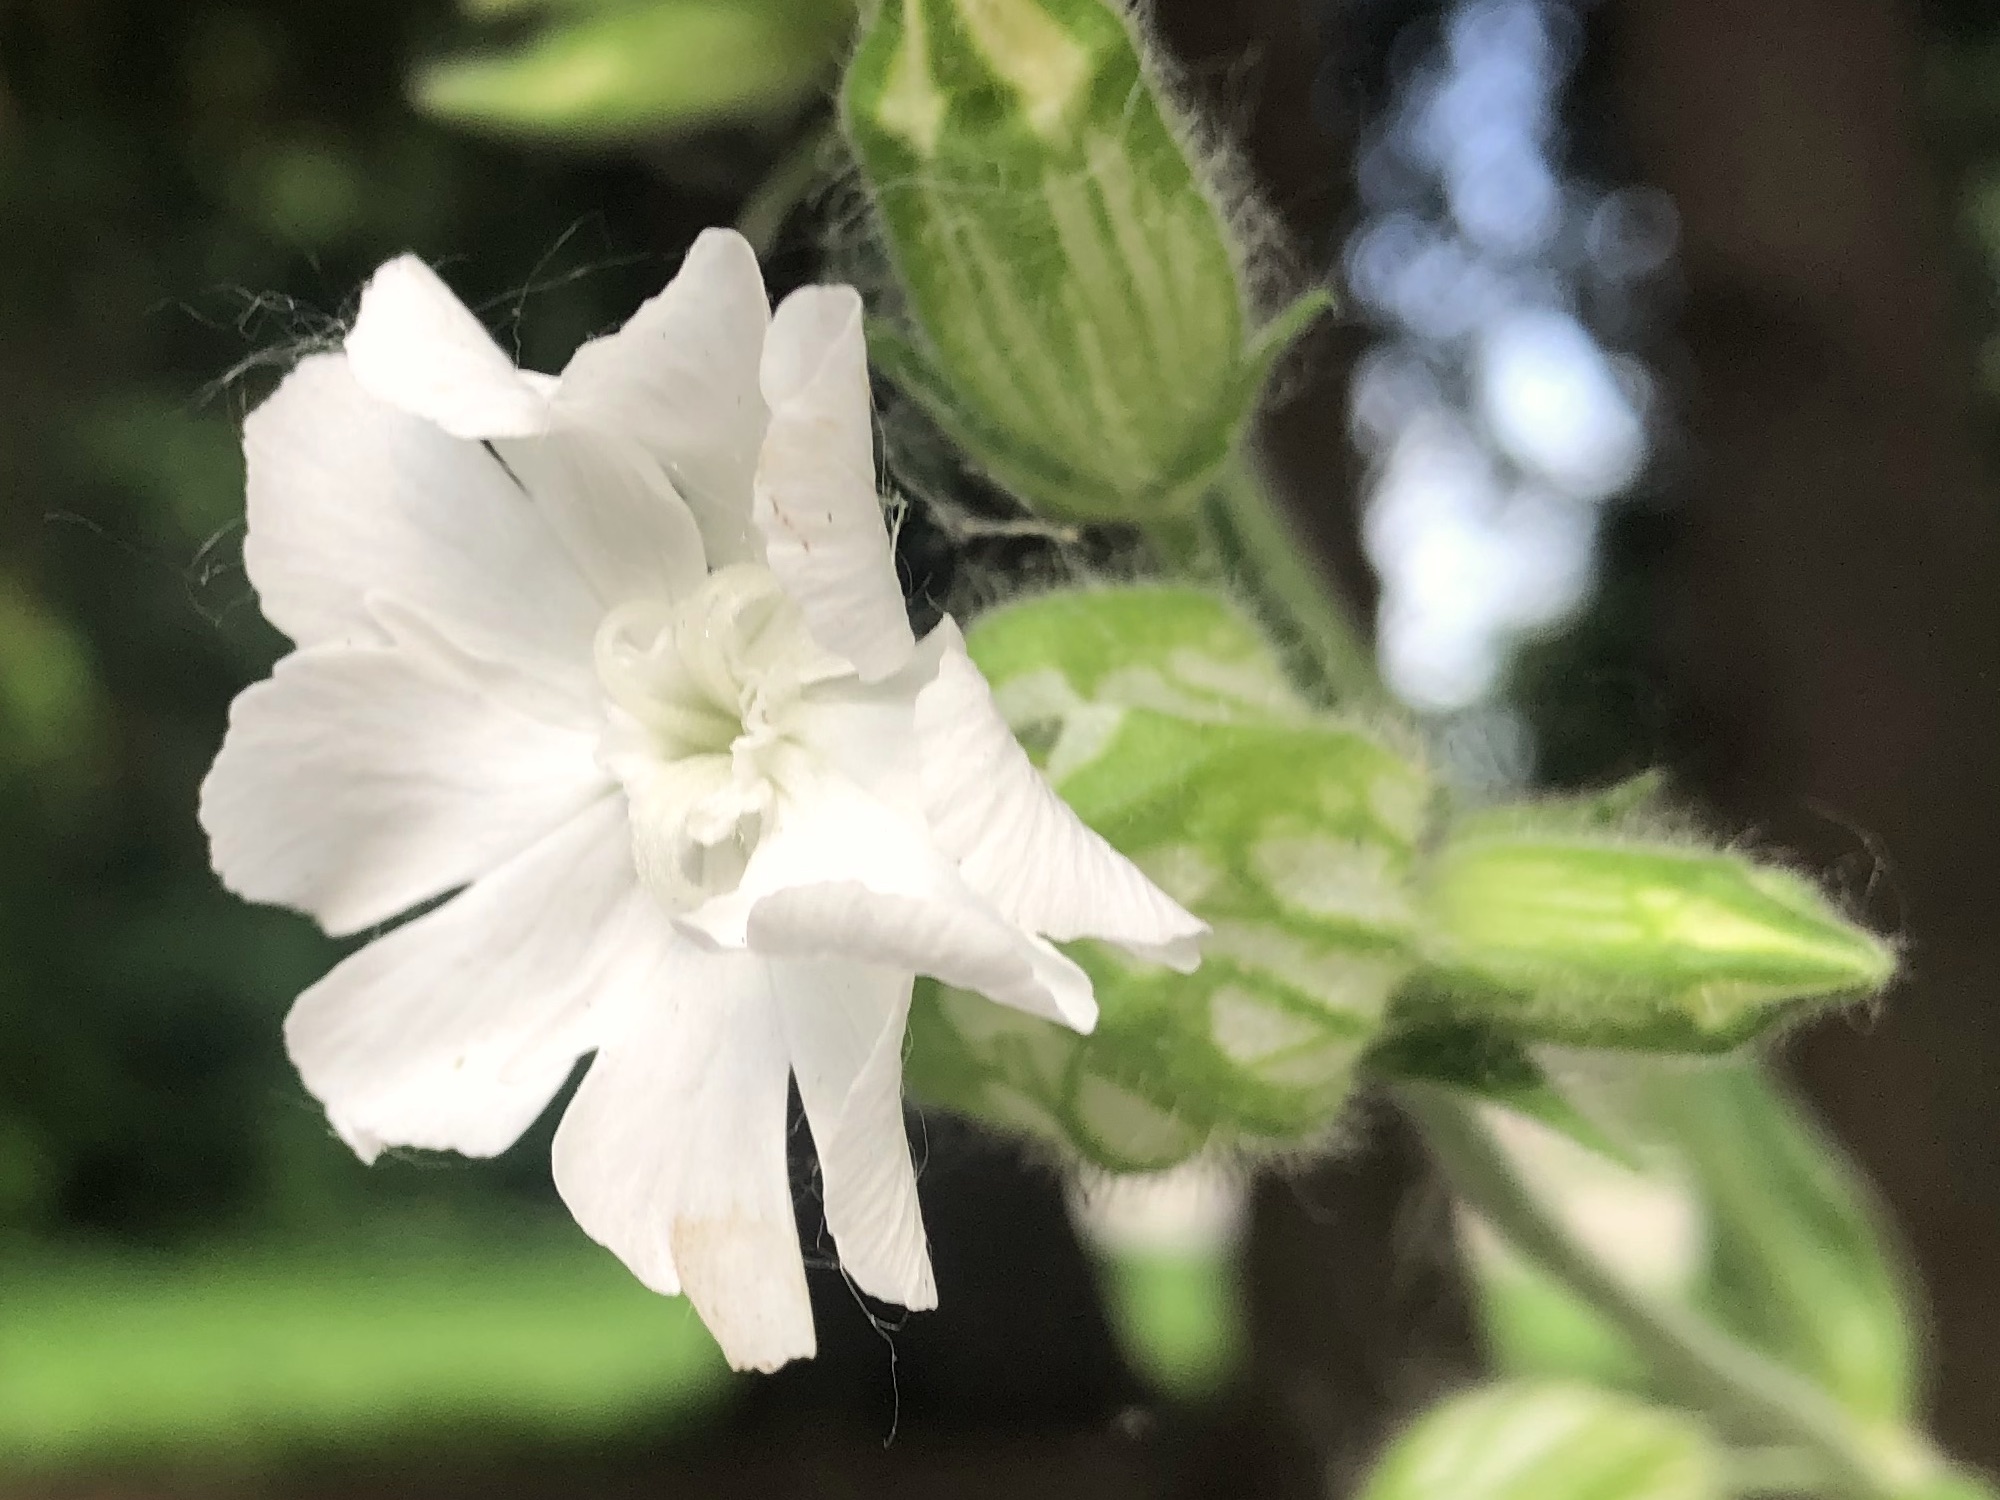 White Campion near Wingra Park parking lot in Madison, Wisconsin on June 15, 2022.